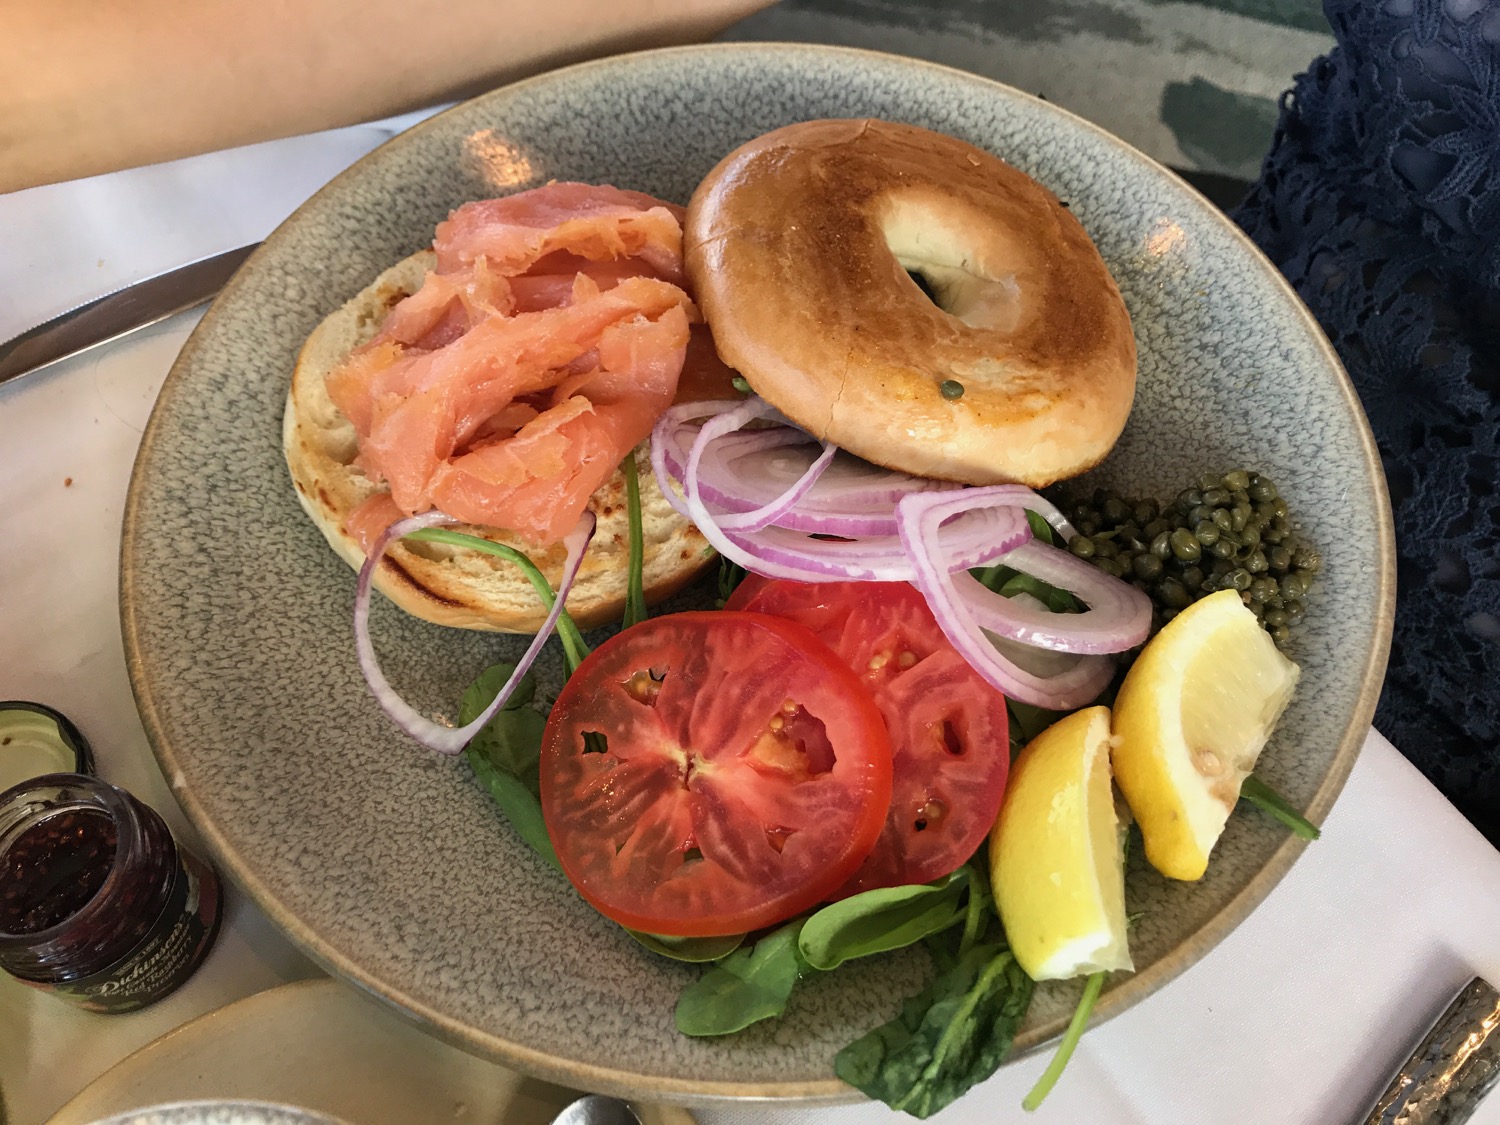 a plate of bagel and vegetables